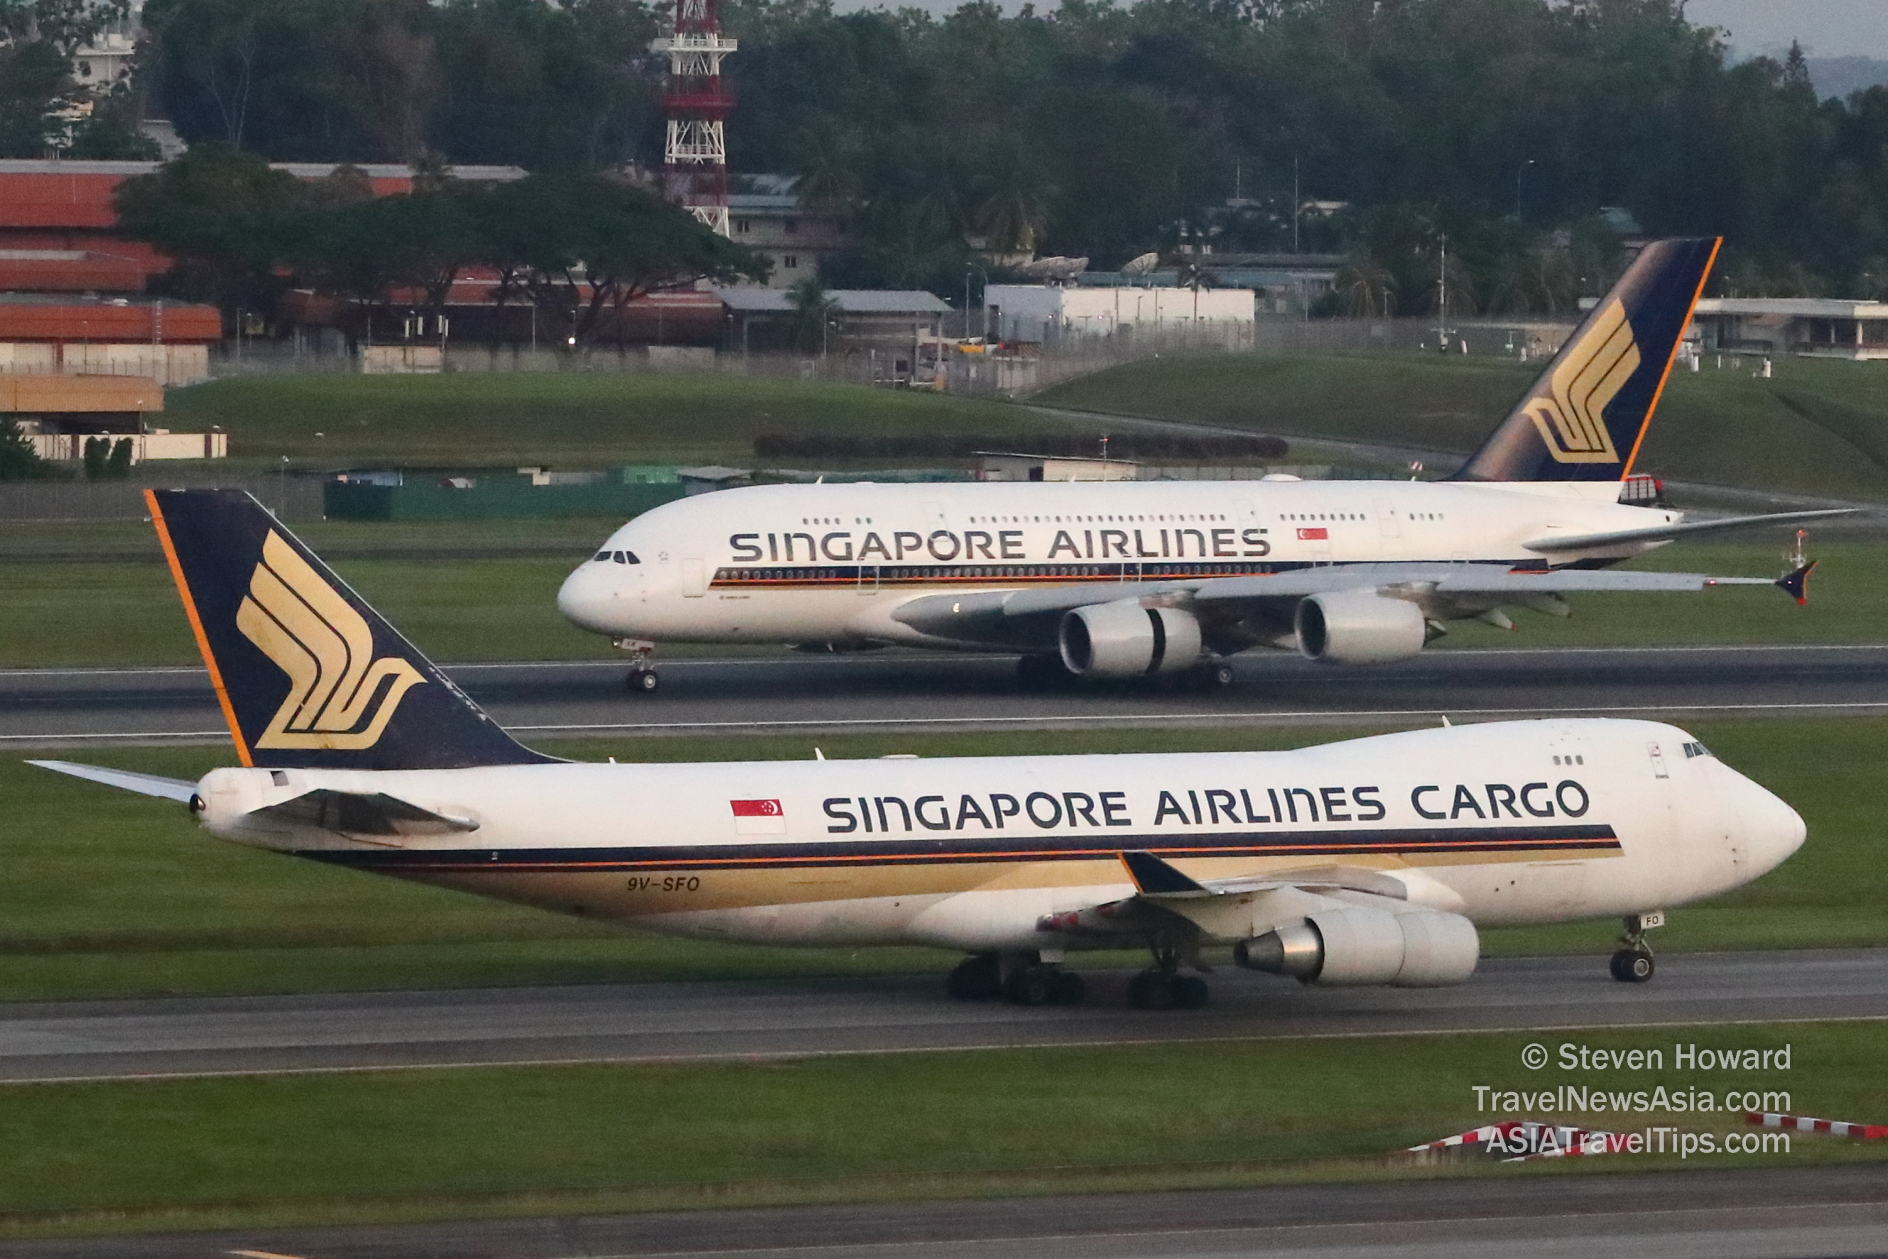 Singapore Airlines A380 and B747F at Changi Airport. Picture by Steven Howard of TravelNewsAsia.com Click to enlarge.